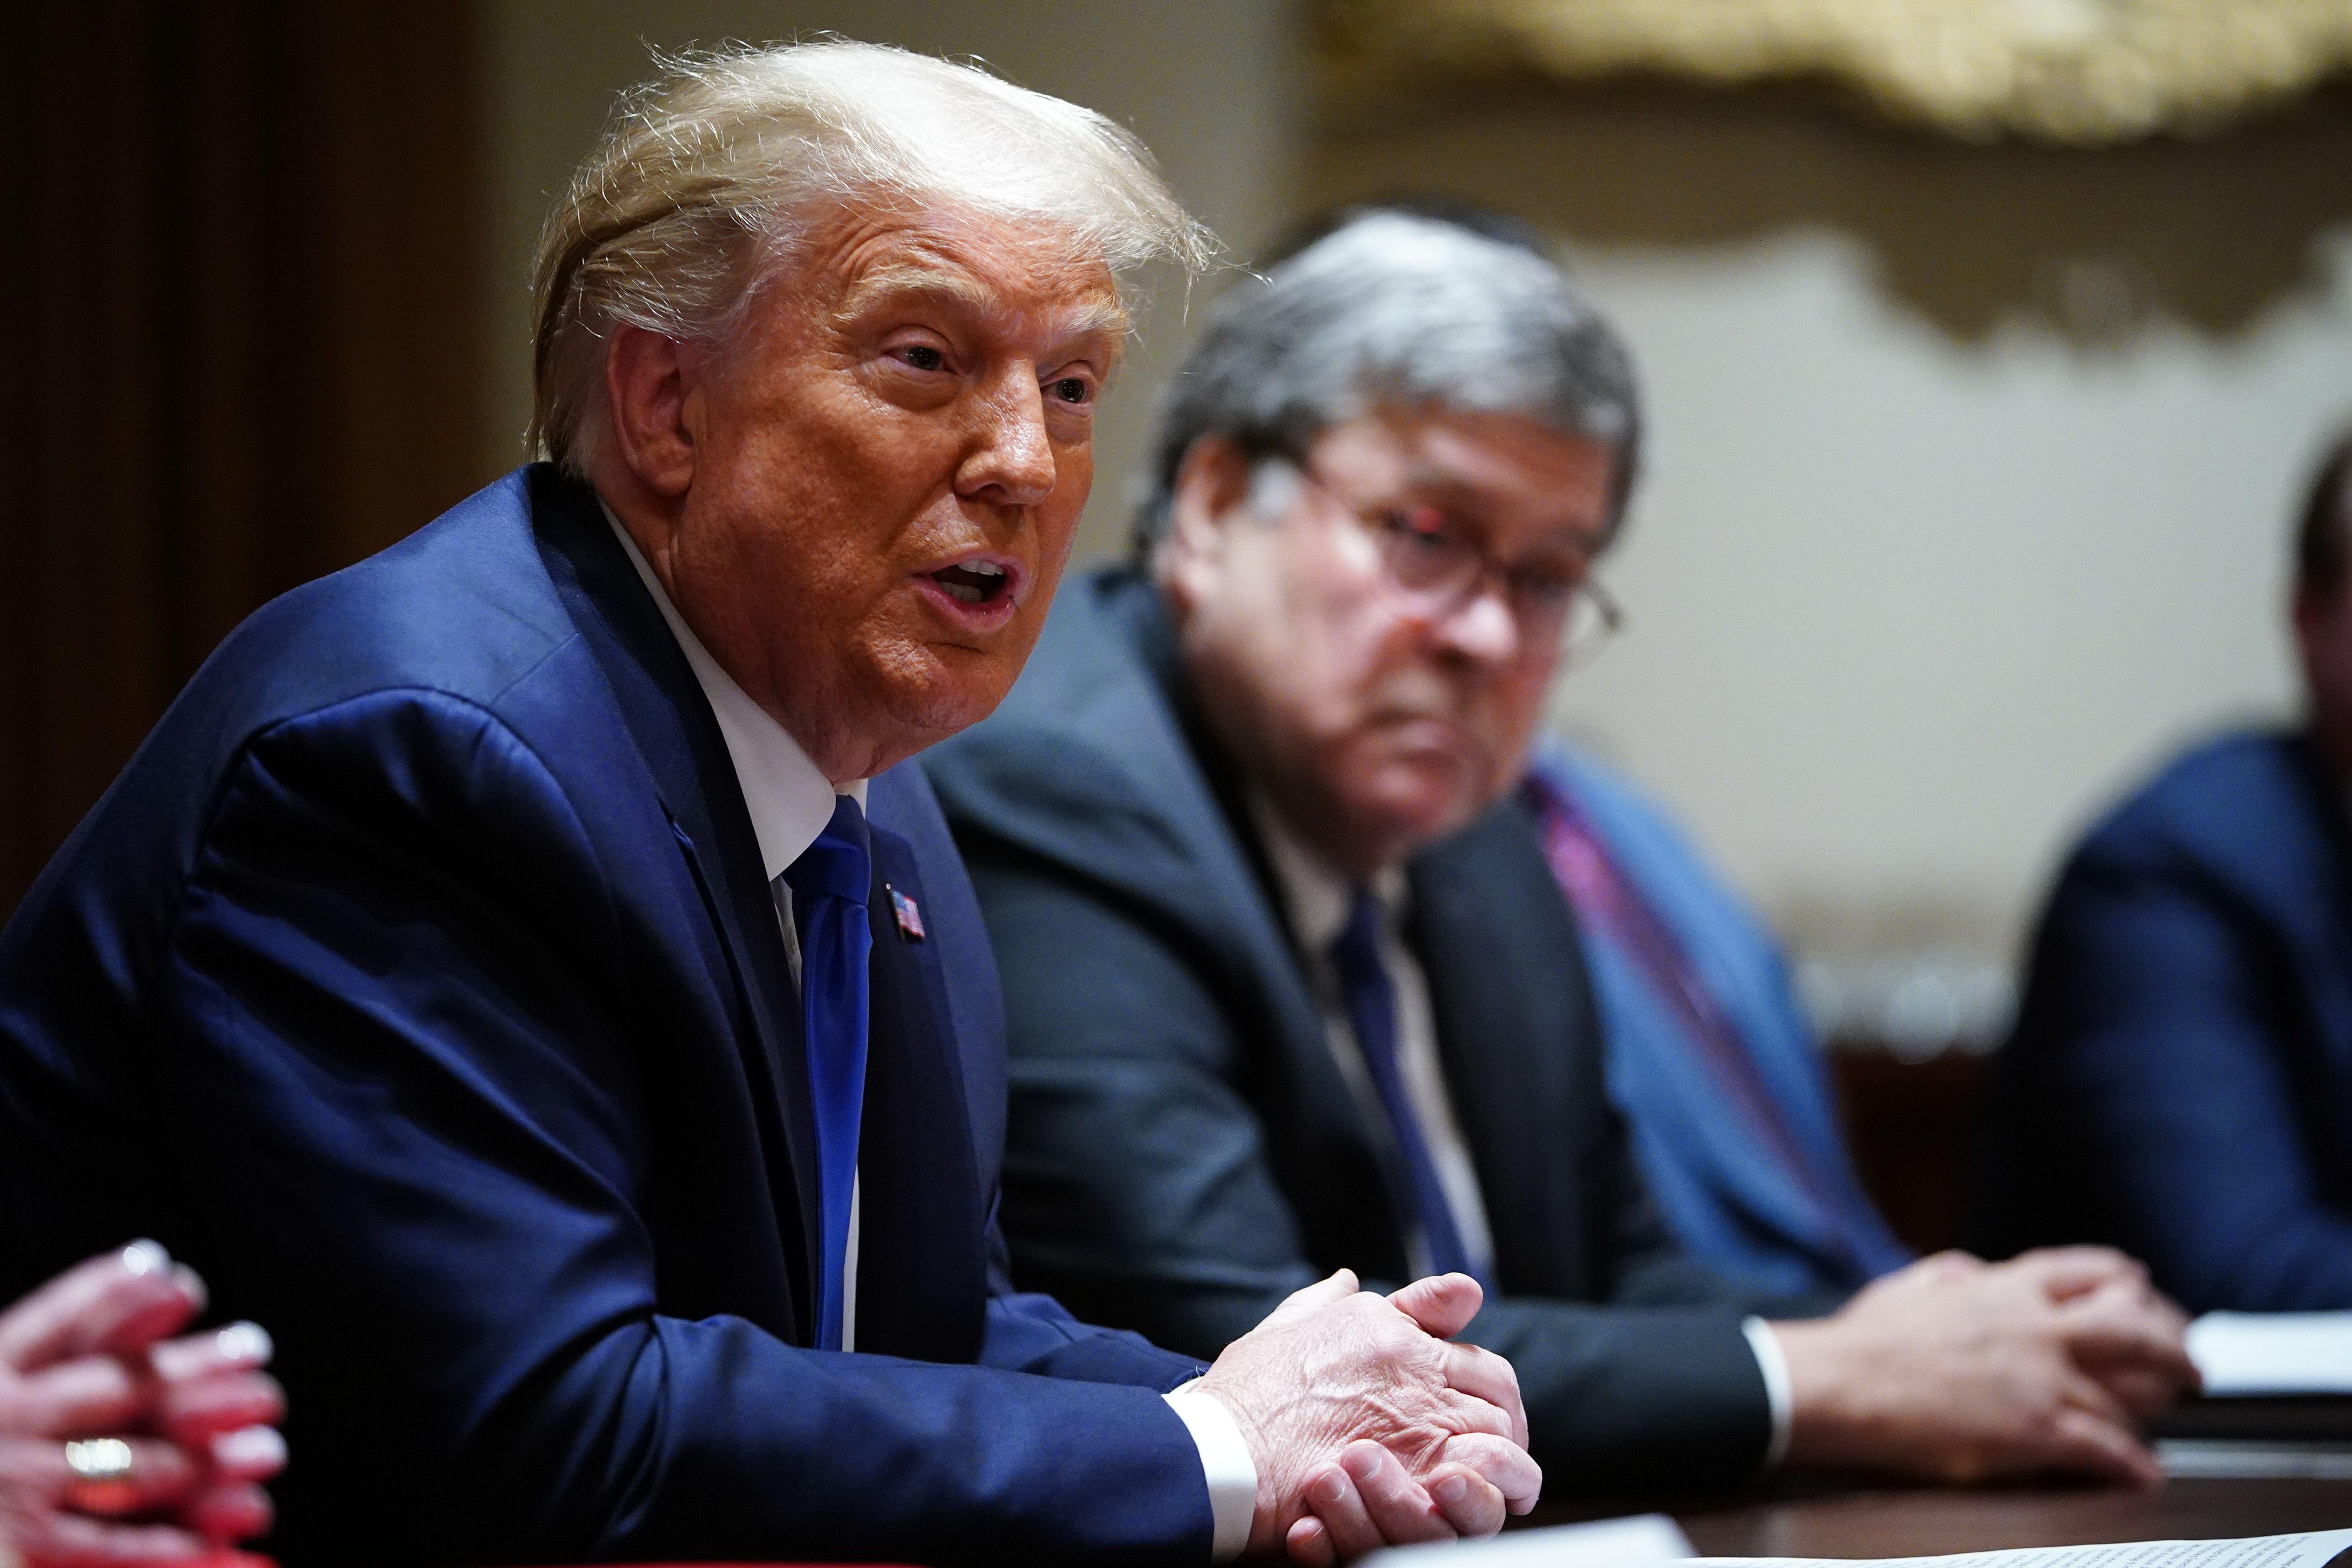 Trump, speaking, and Barr seated at a conference table with other government officials